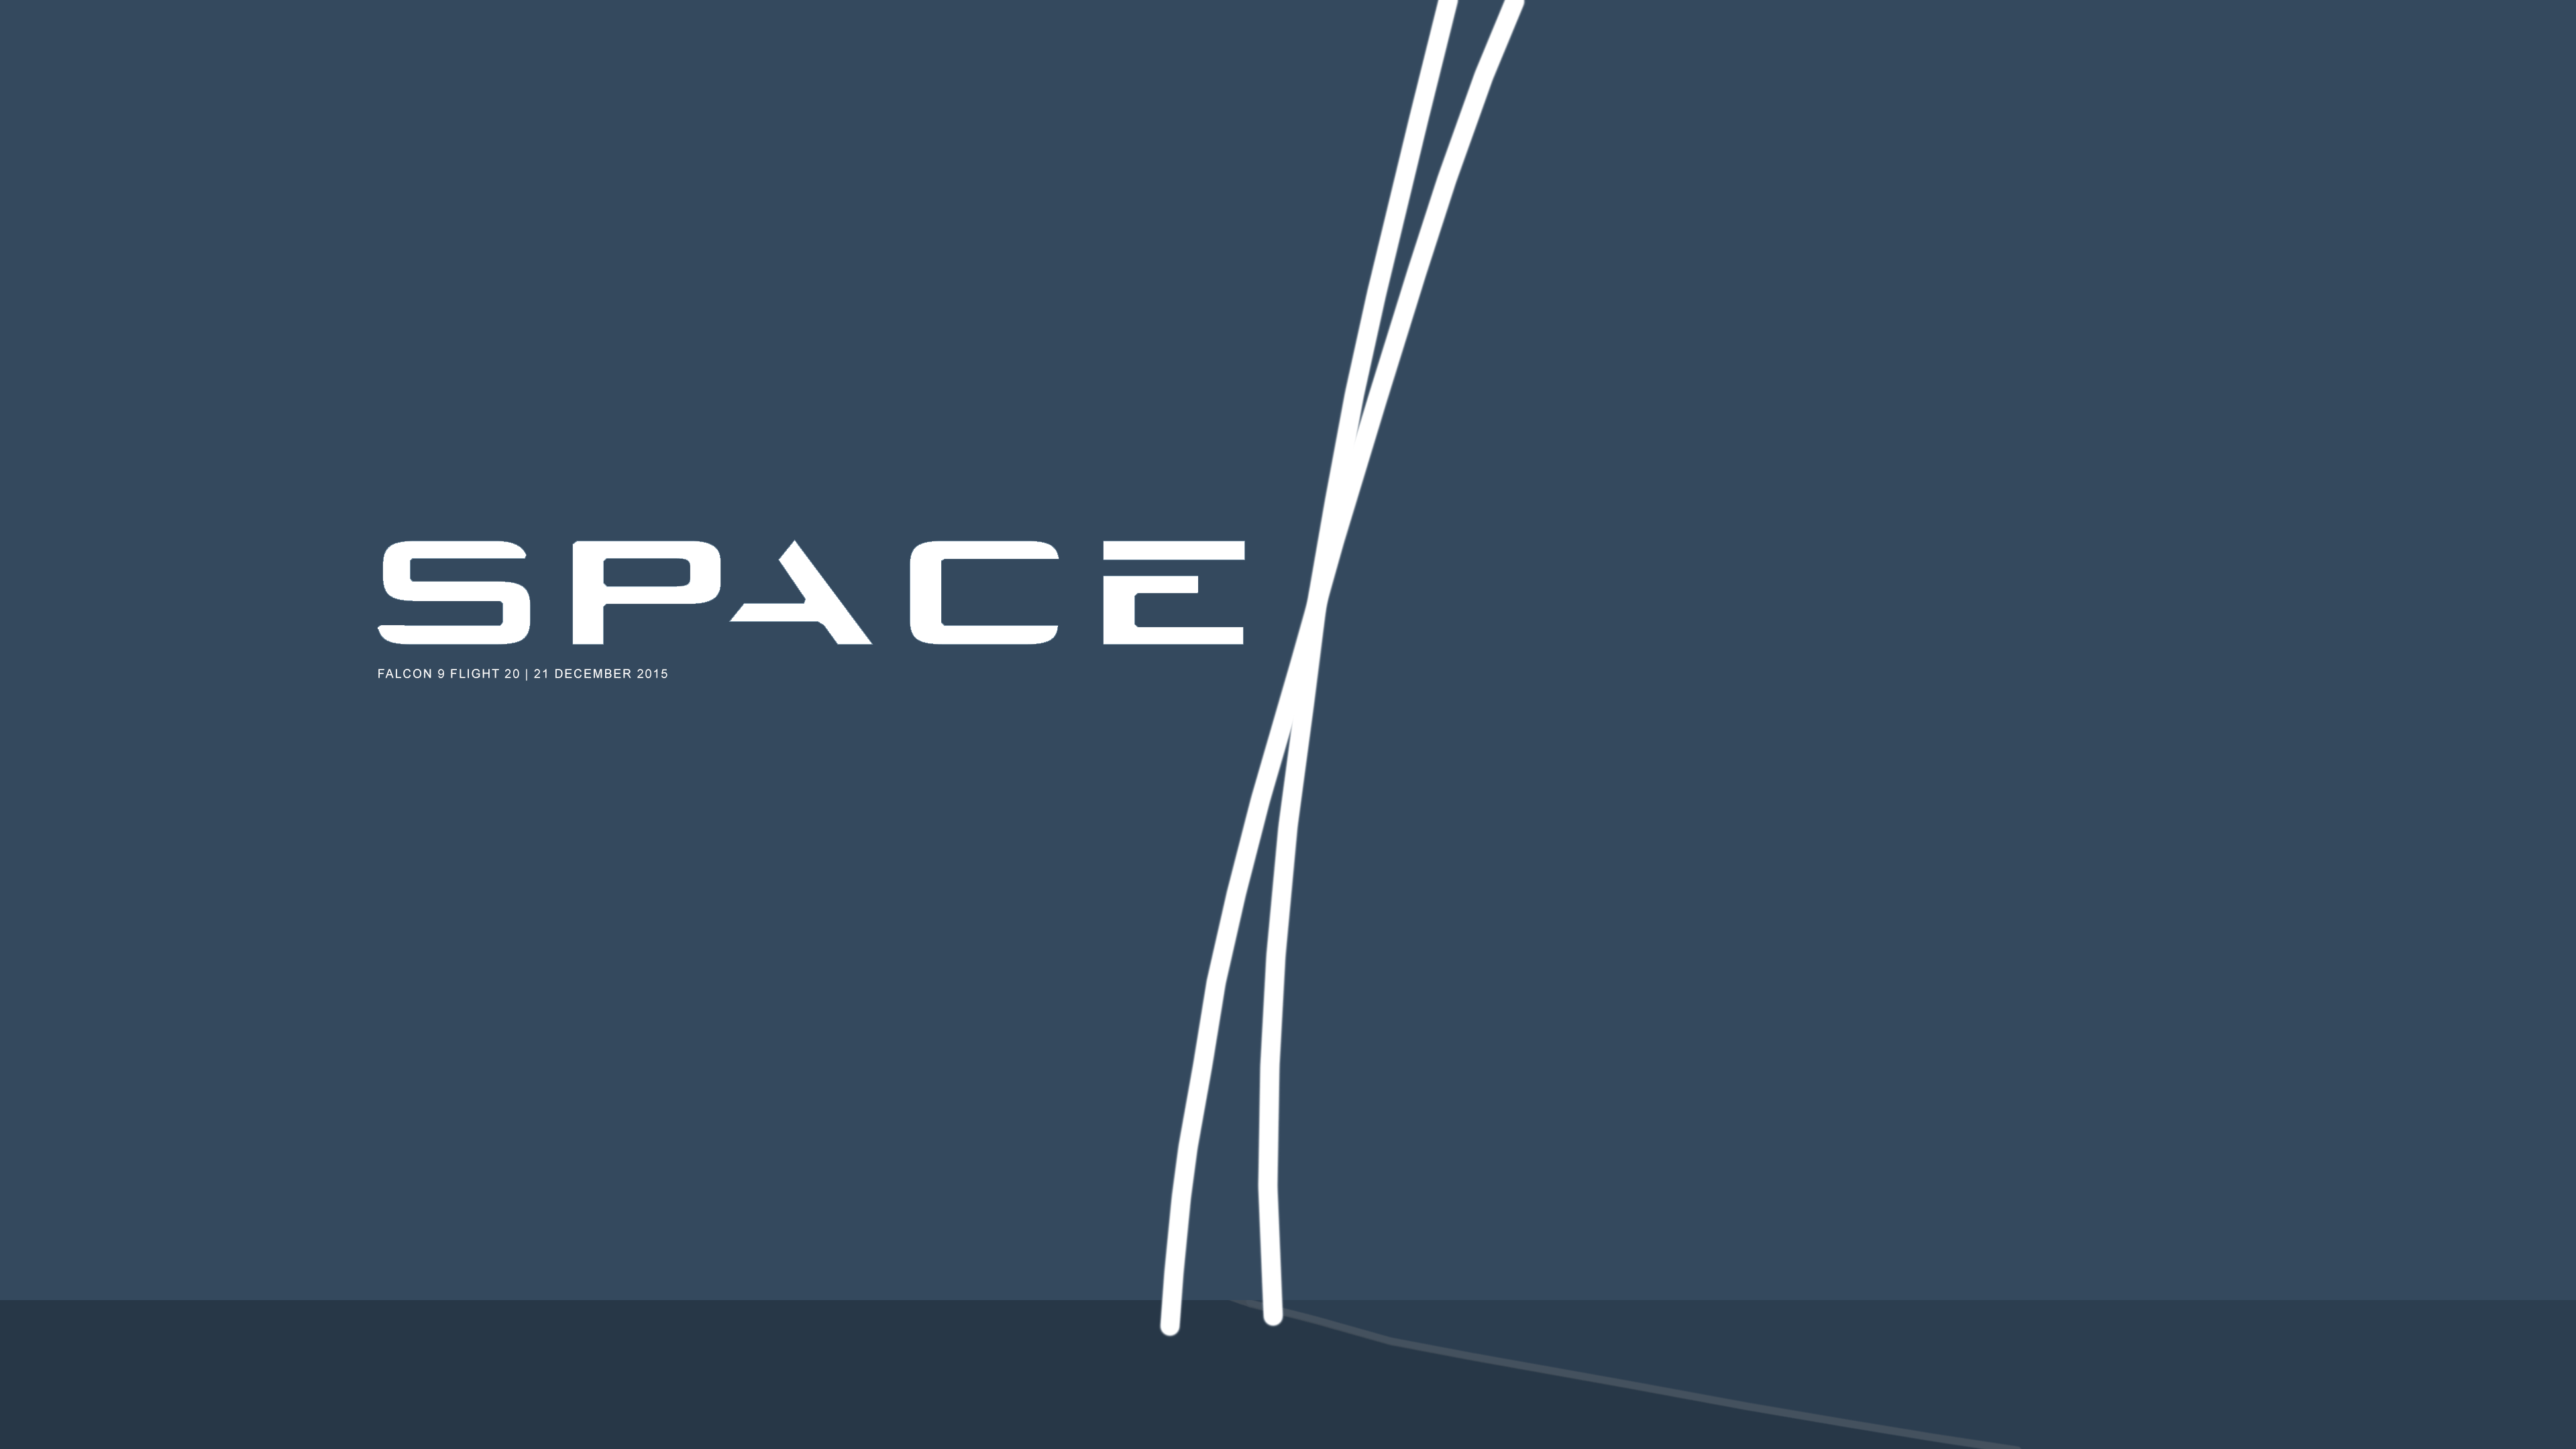 SpaceX wallpapers collection